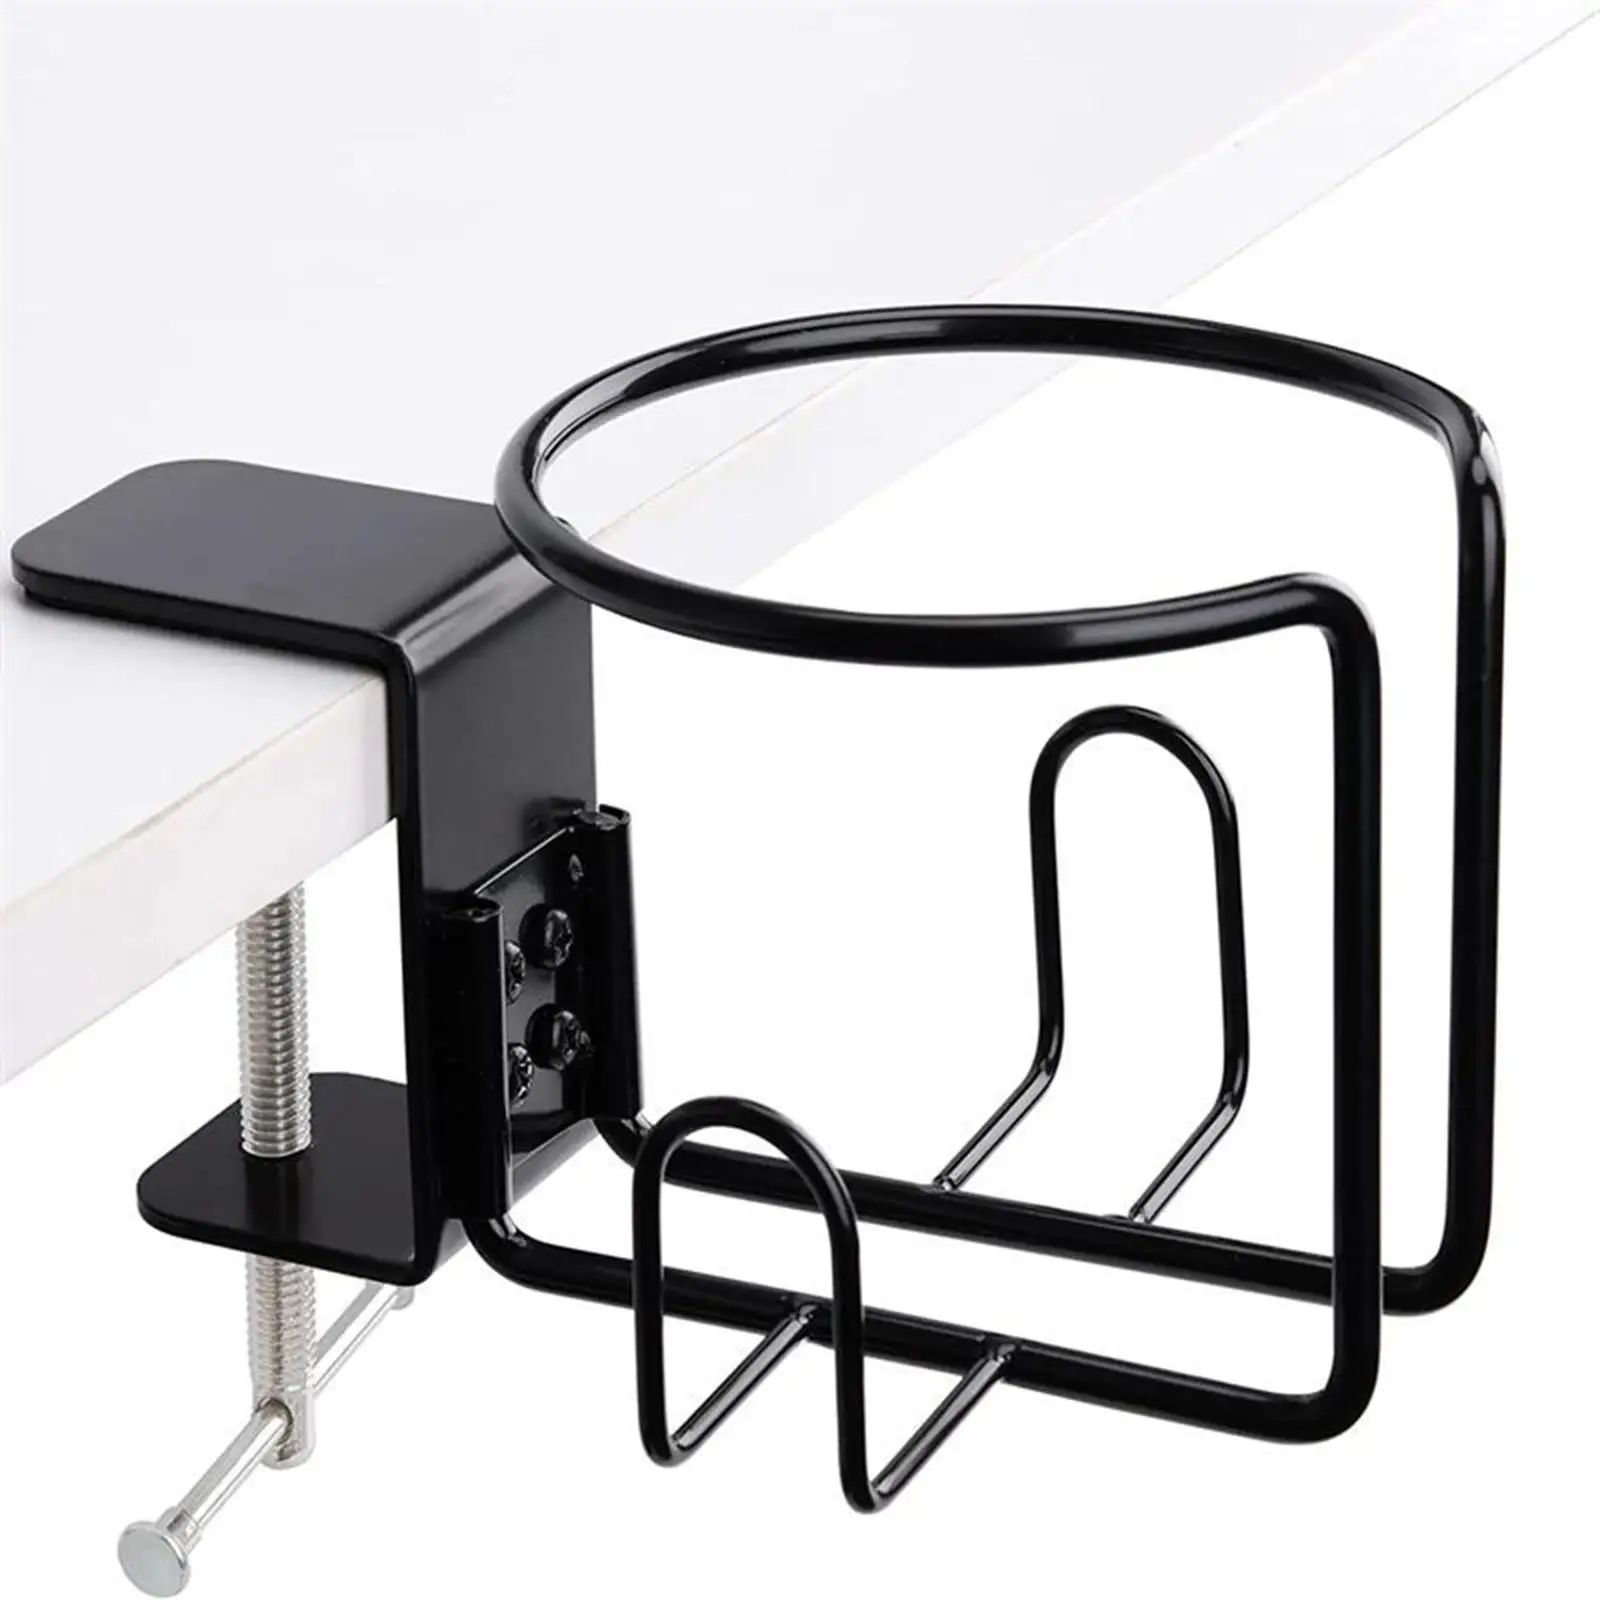 Anti Spill Cup Holder Office Supplies Metal Gaming Desk Accessories Horizontal or Vertical Mounts Water Bottle Holder